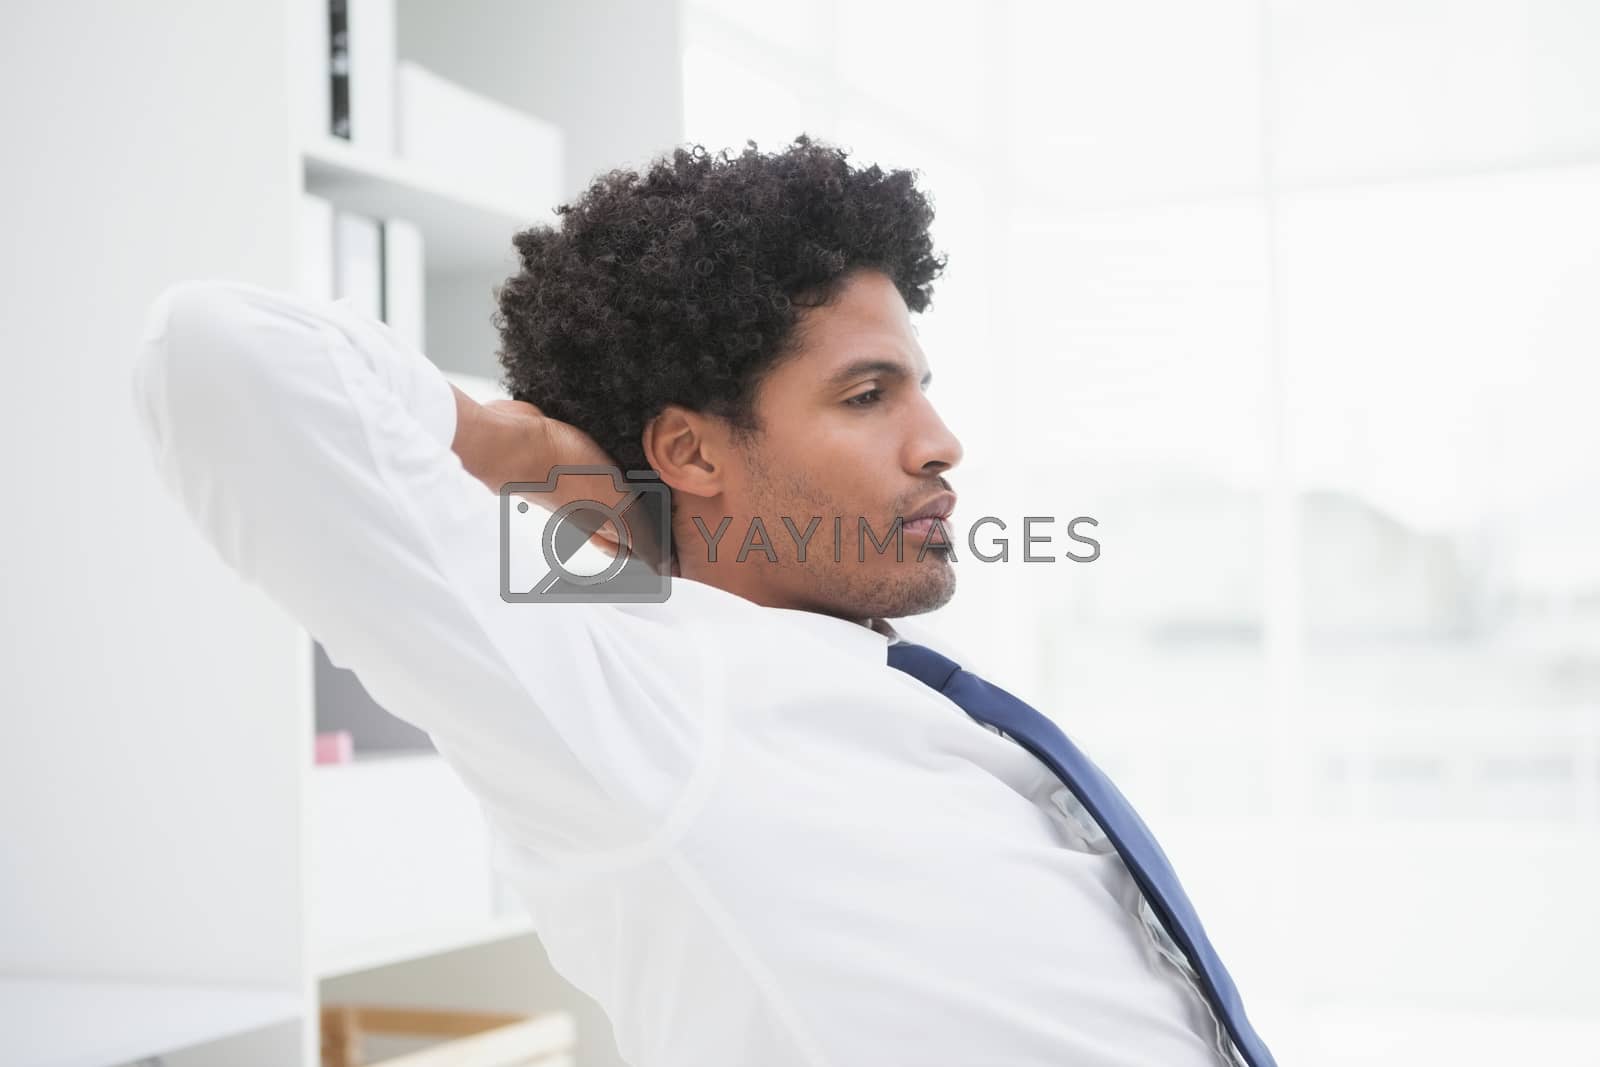 Royalty free image of Peaceful businessman relaxing at work by Wavebreakmedia